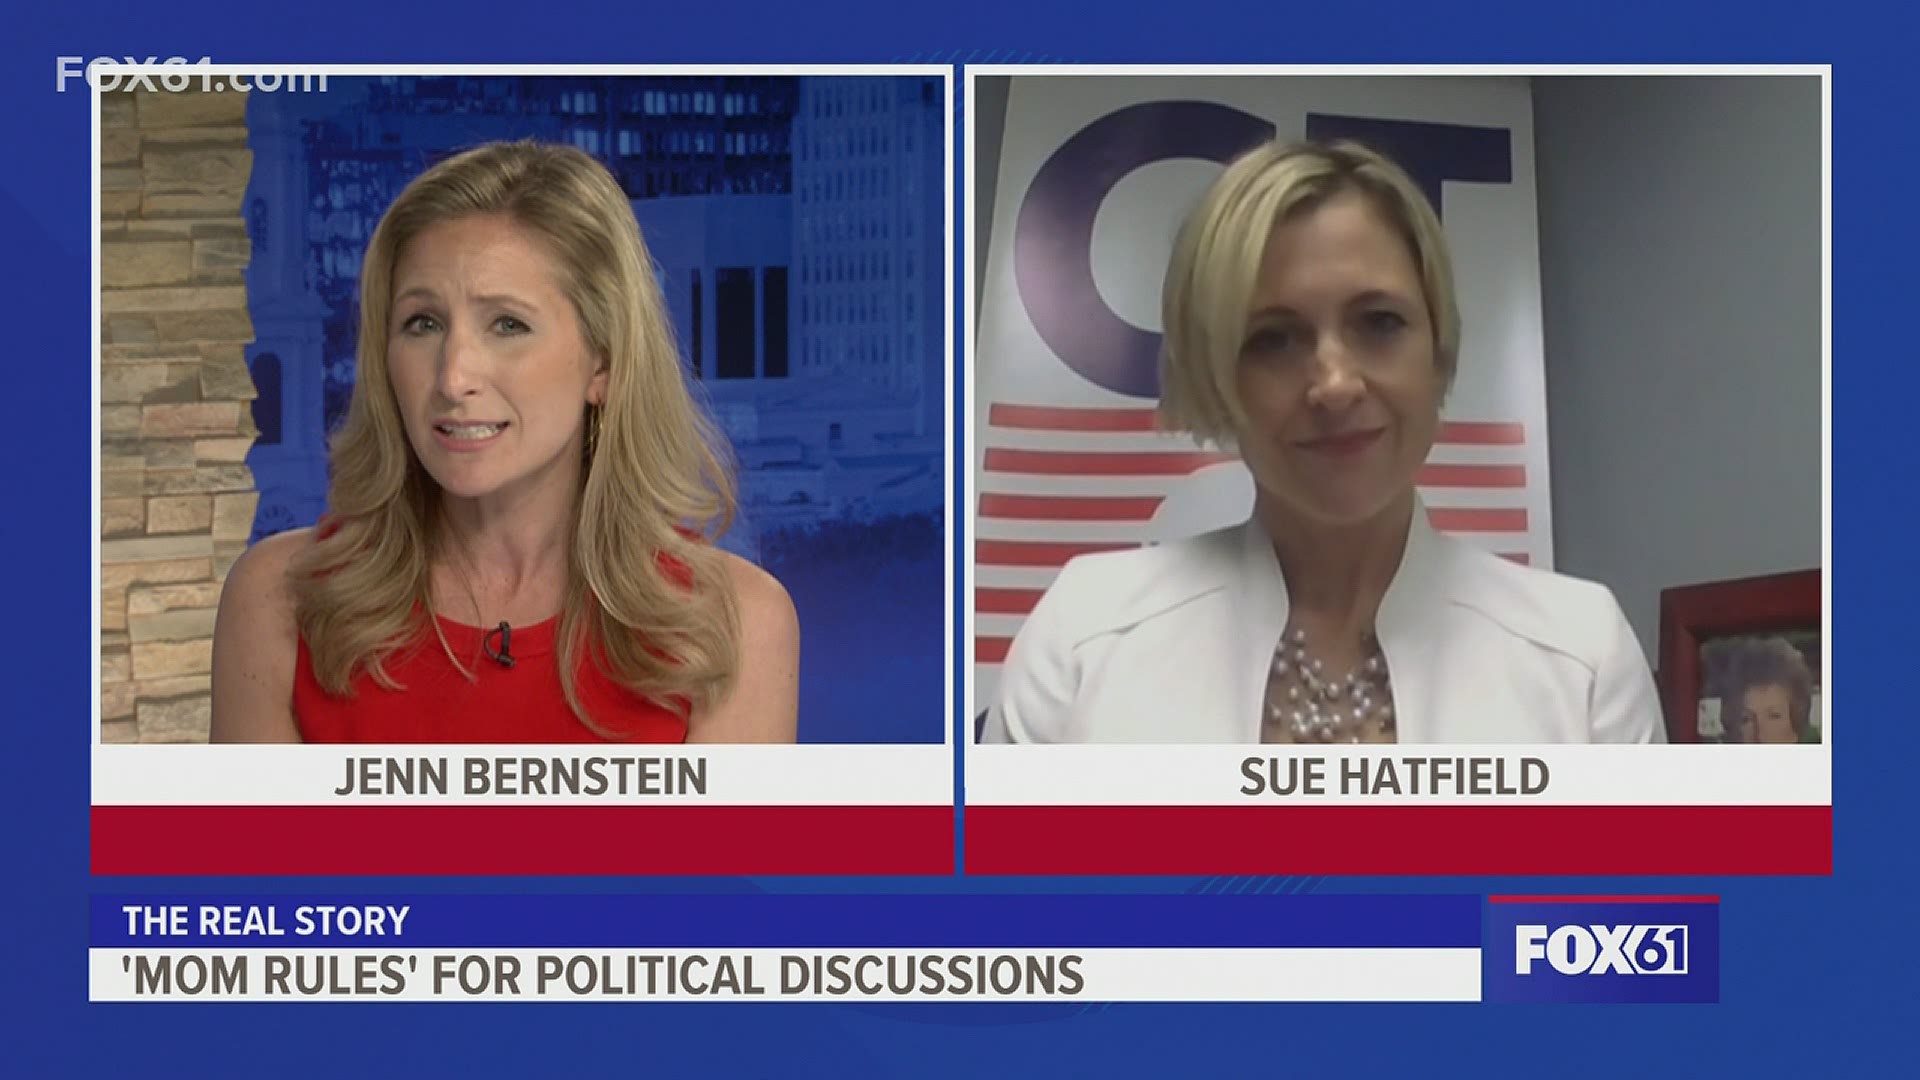 She talks to Real Story host Jenn Bernstein about her 'Mom Rules' op-ed and what it will take to bring civility to political discourse.